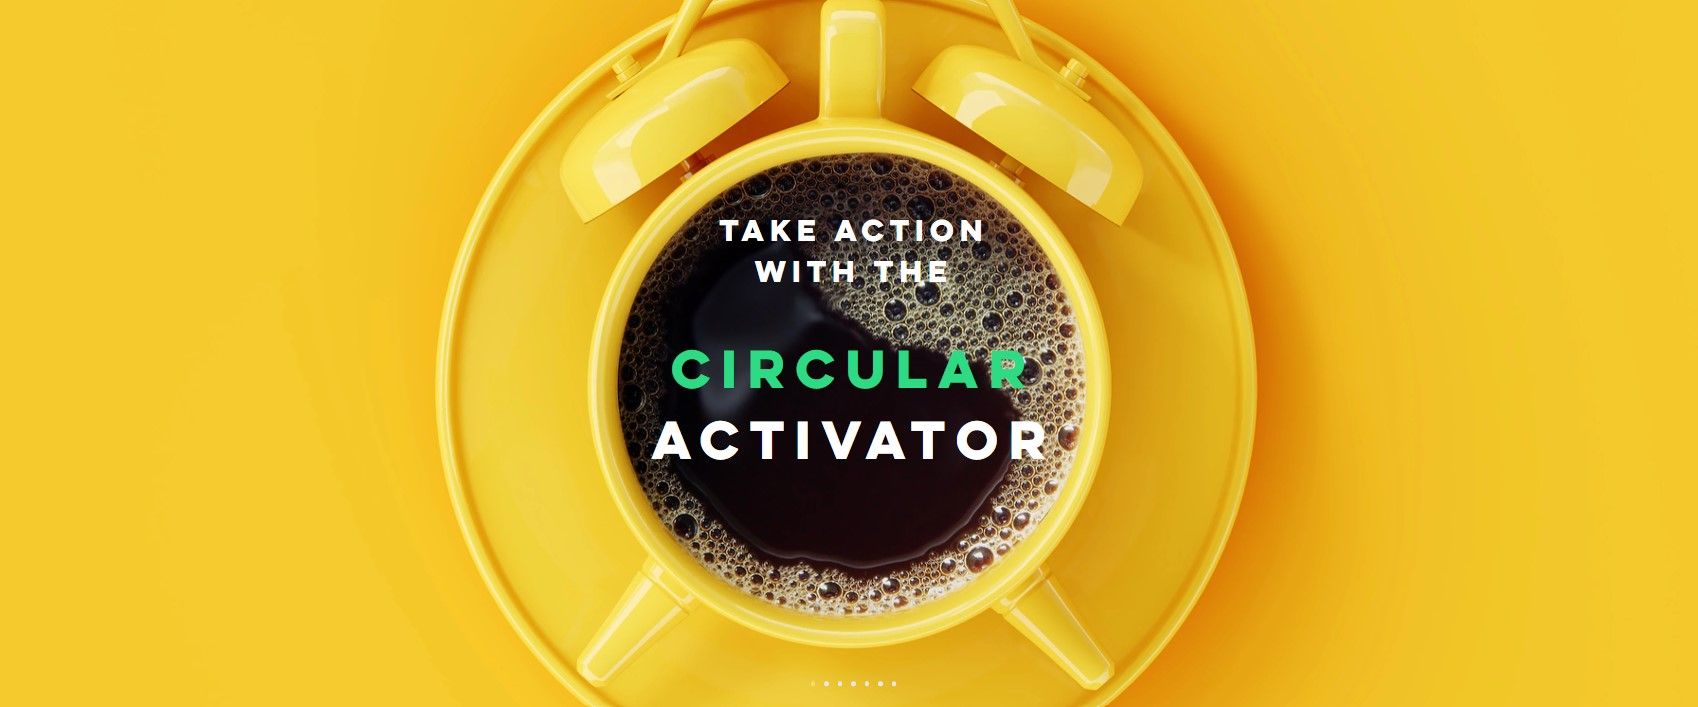 Yellow circular image with words "Take action with the circular activator"